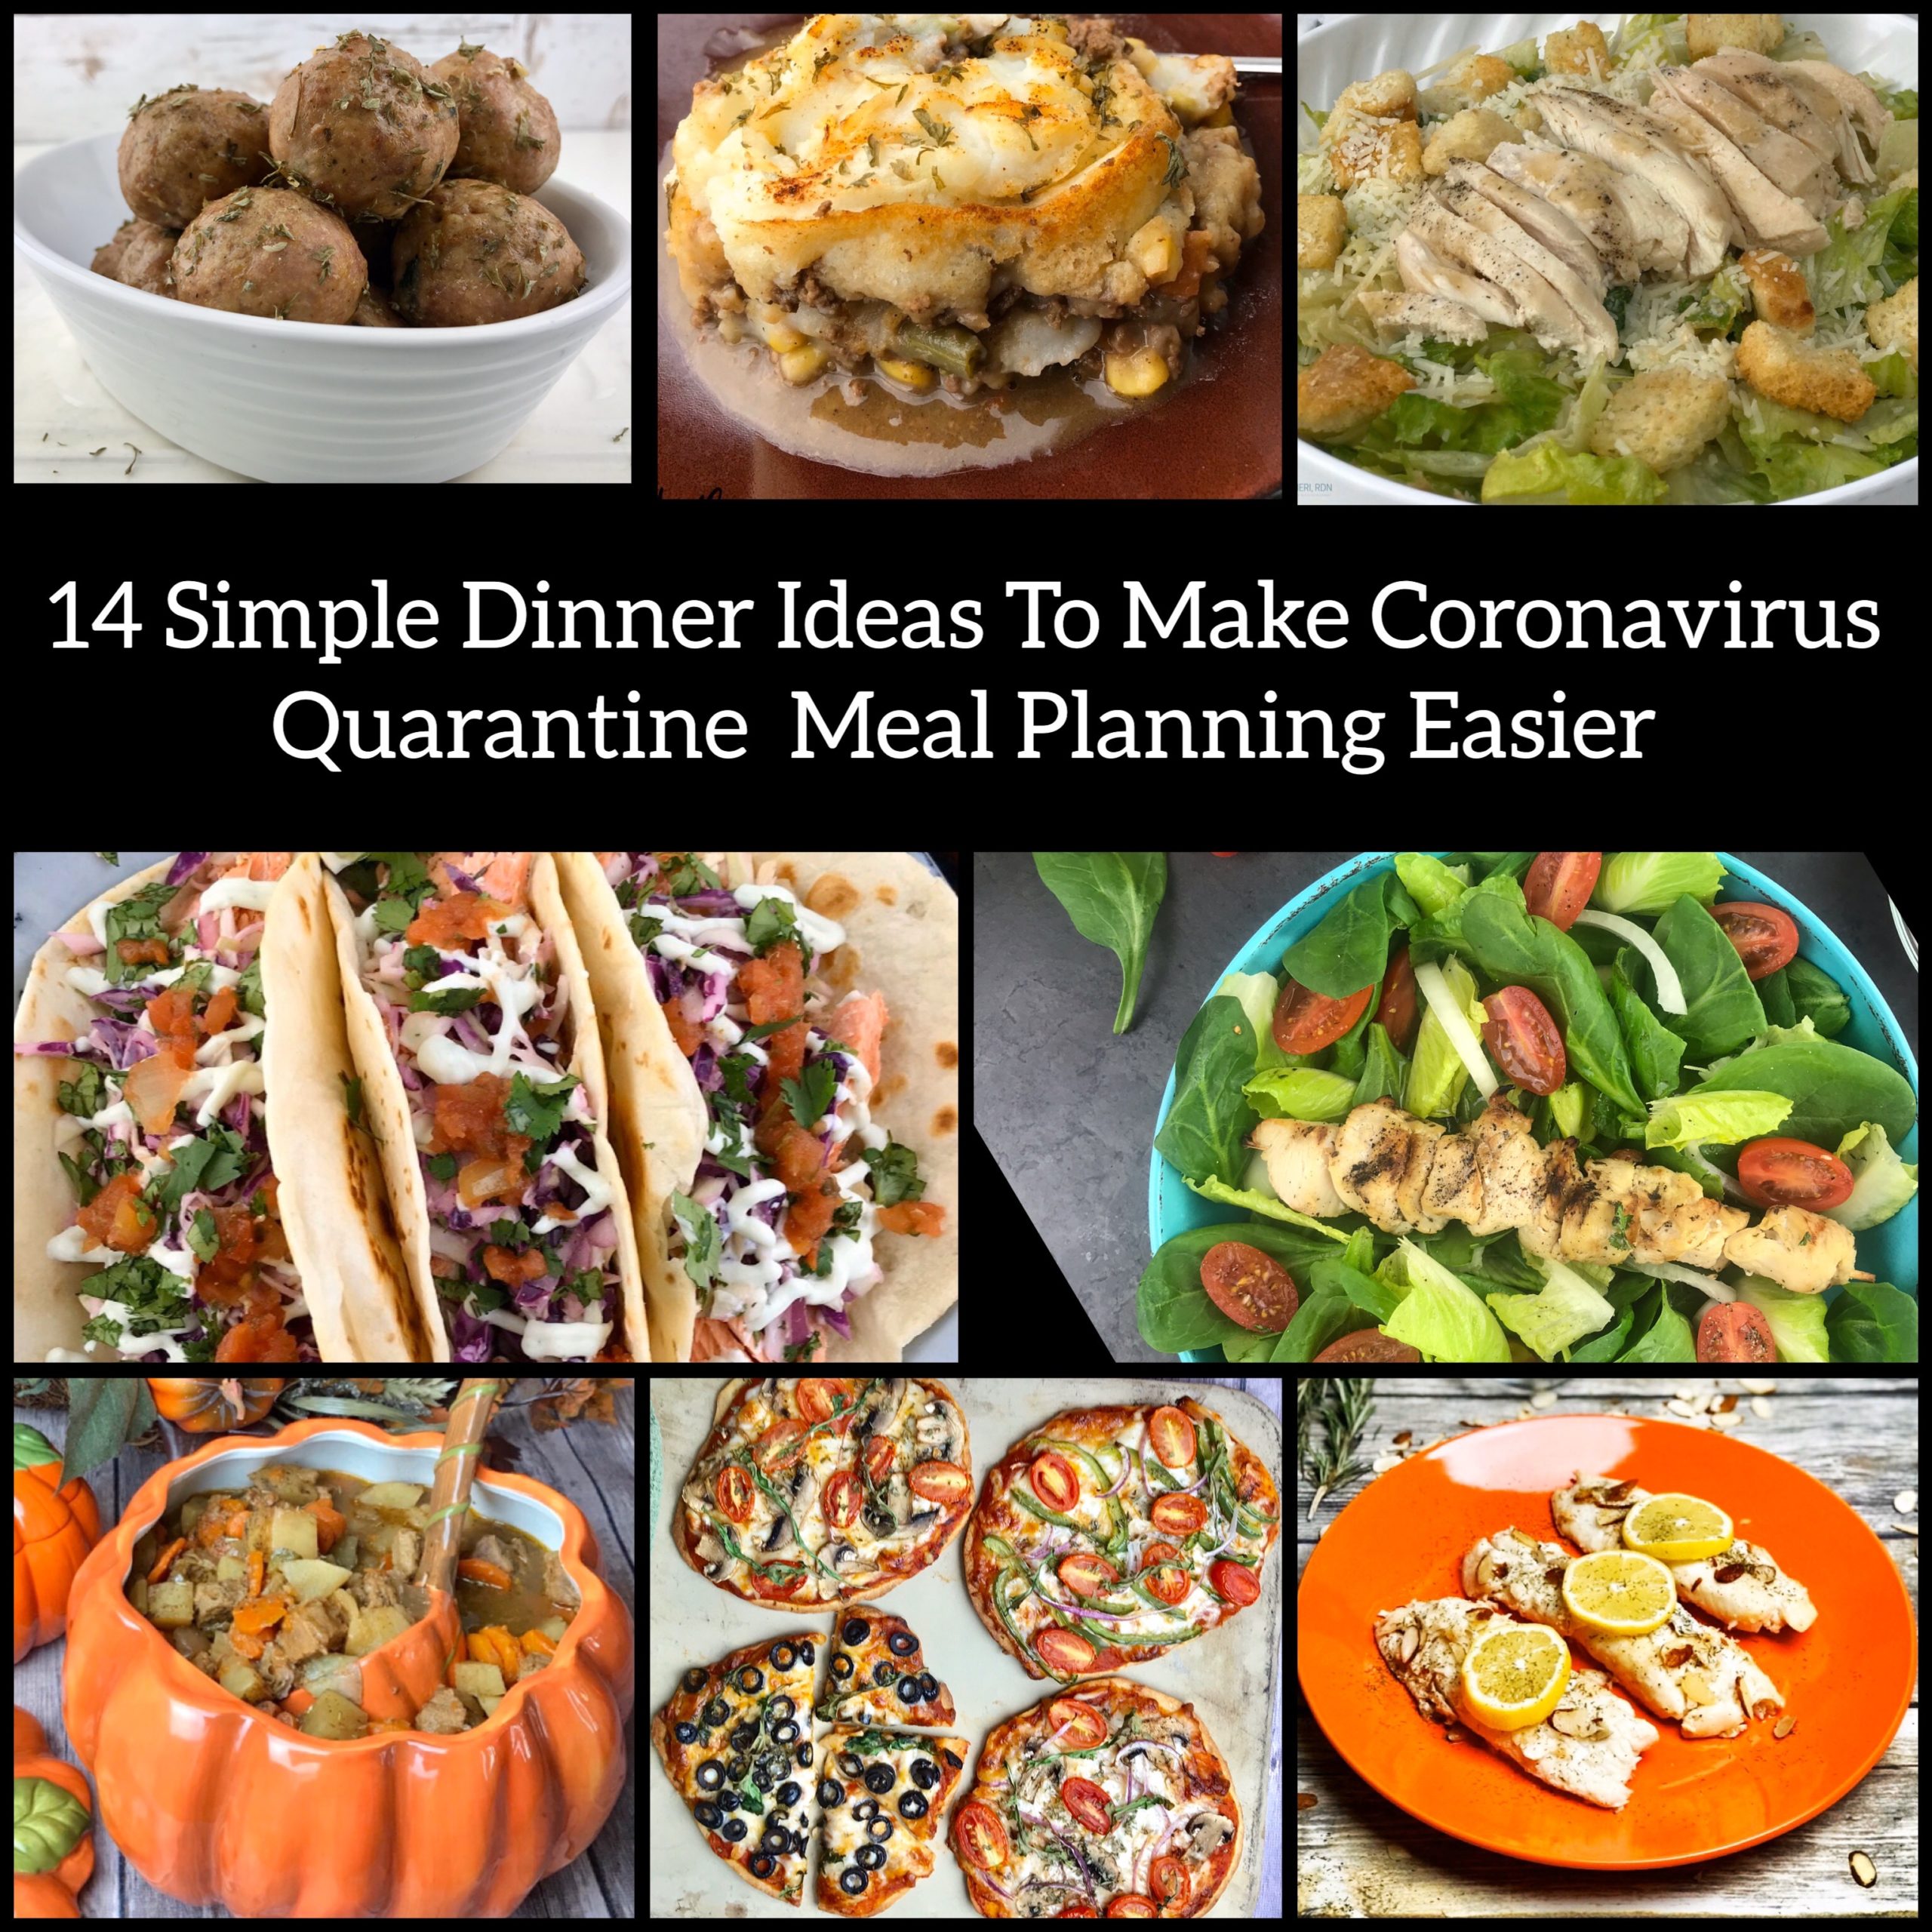 14 Dinner Ideas To Make Meal Planning During The